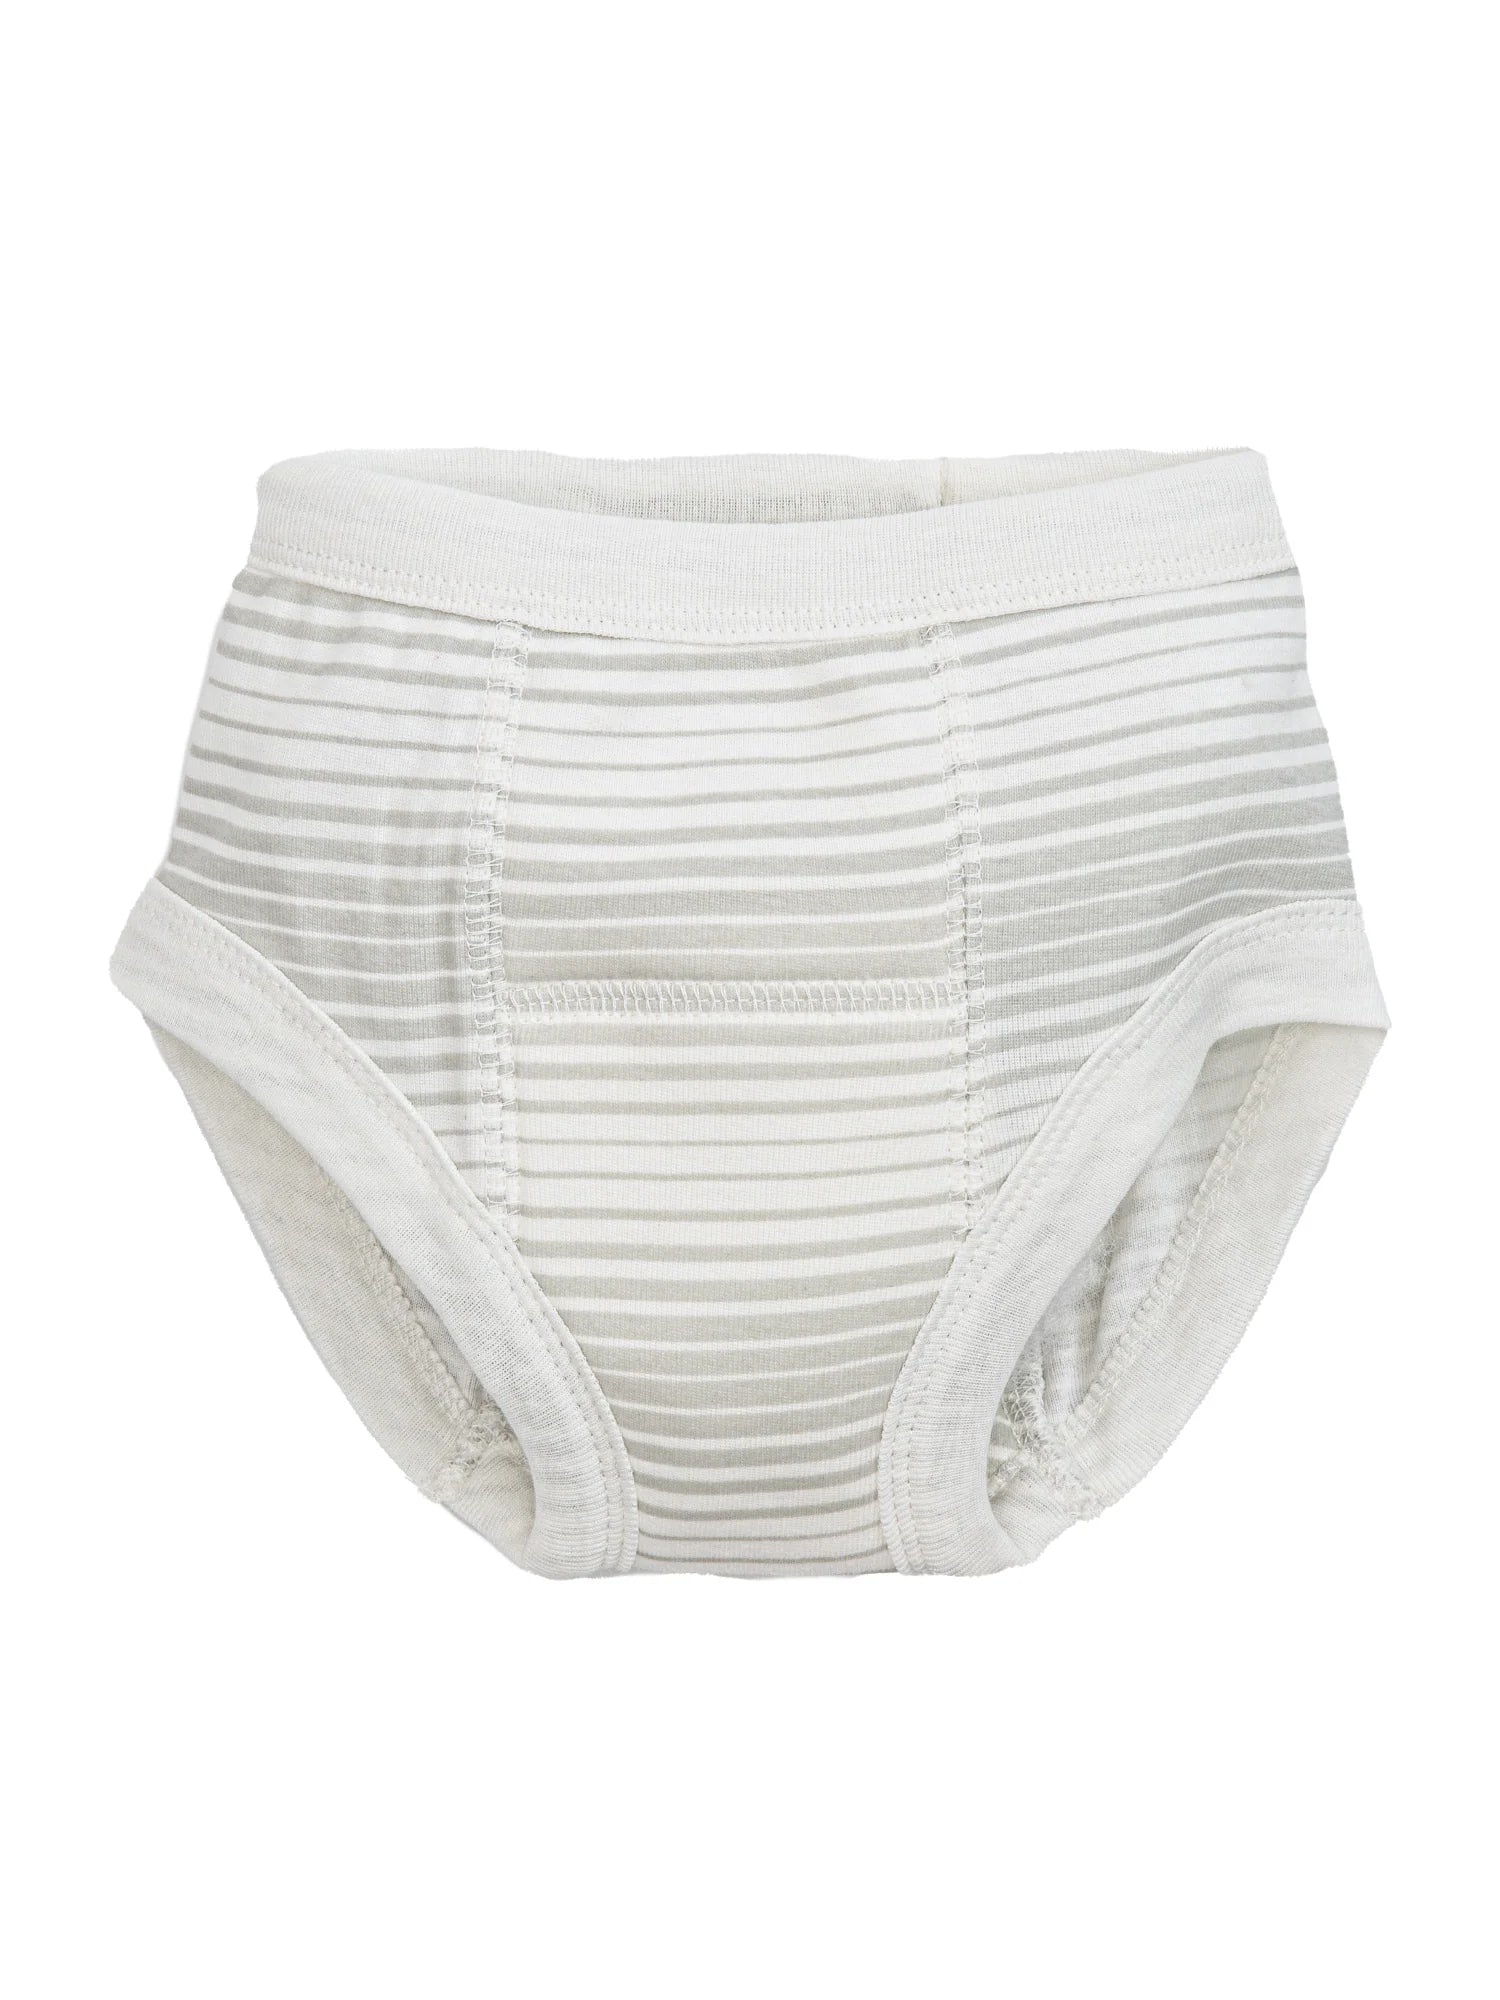 Kindermum Pull up Padded Briefs, Cotton Potty Training Pants for Babies,  Pull up Trainers, Padded Shorts for Toddler Setof 2 Training Pants Extra  Large White : Amazon.in: Baby Products